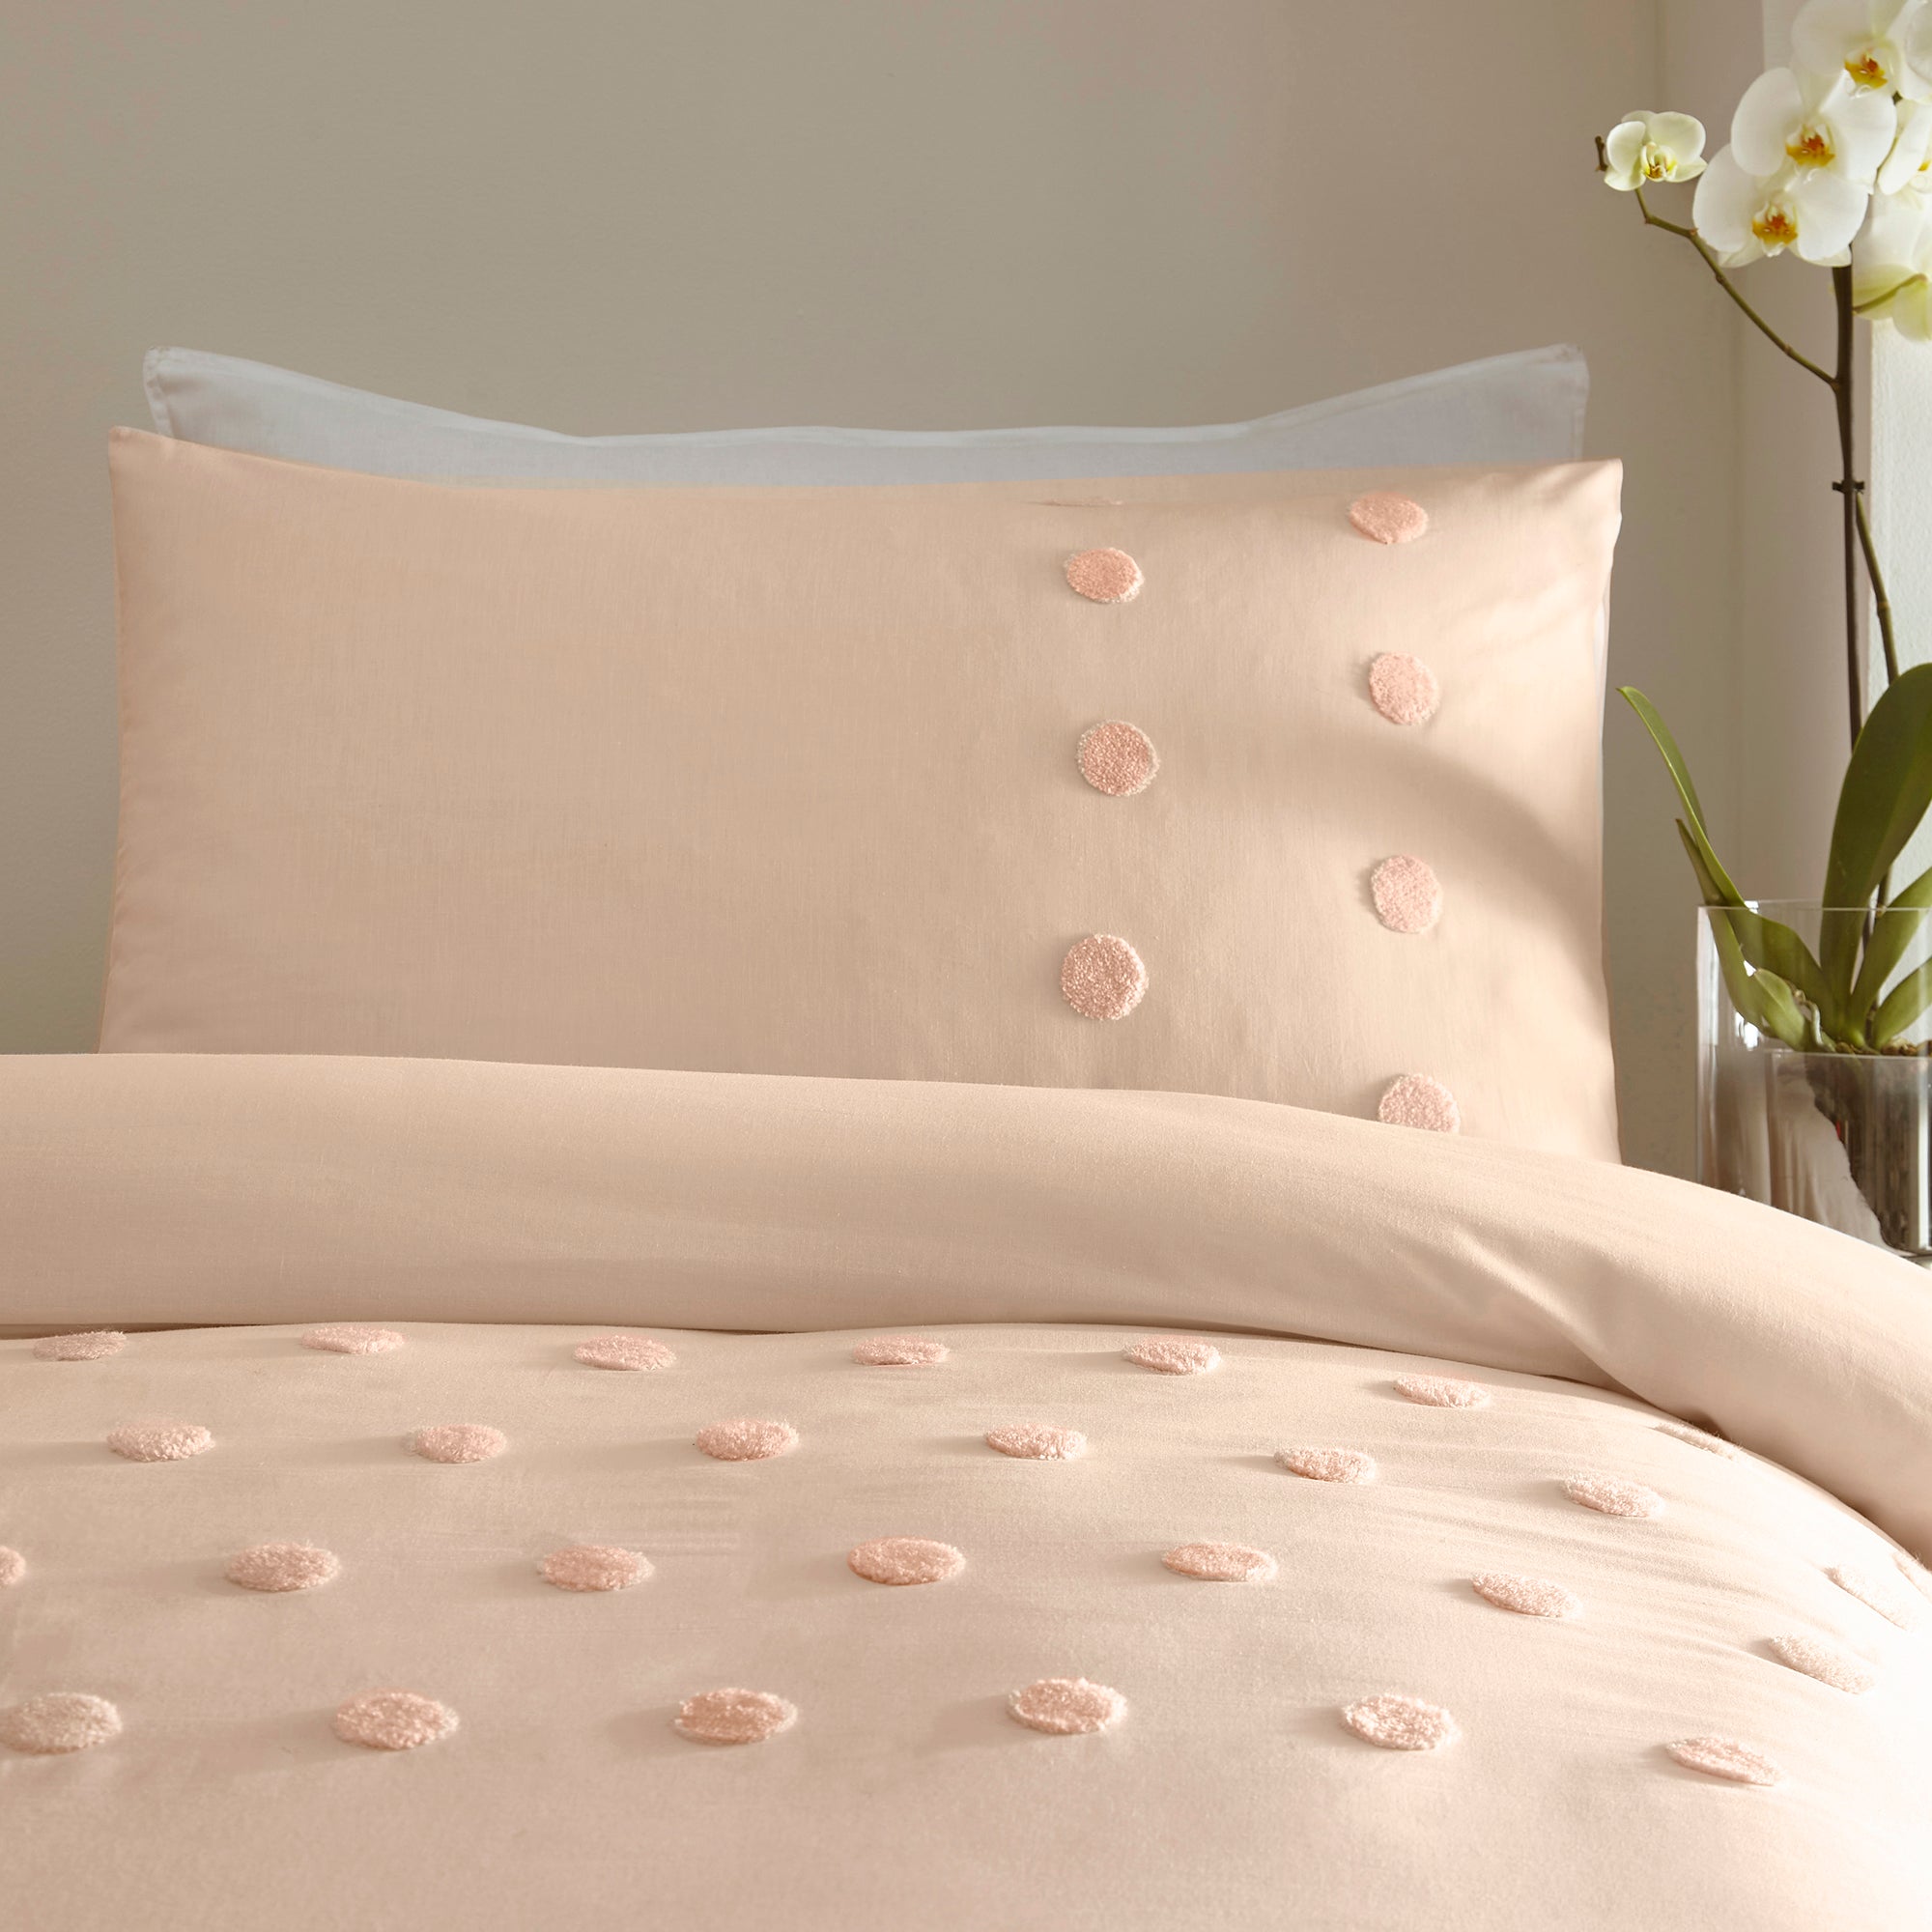 Ayda - Tufted Spots 100% Cotton Duvet Cover Set in Blush - by Appletree Boutique